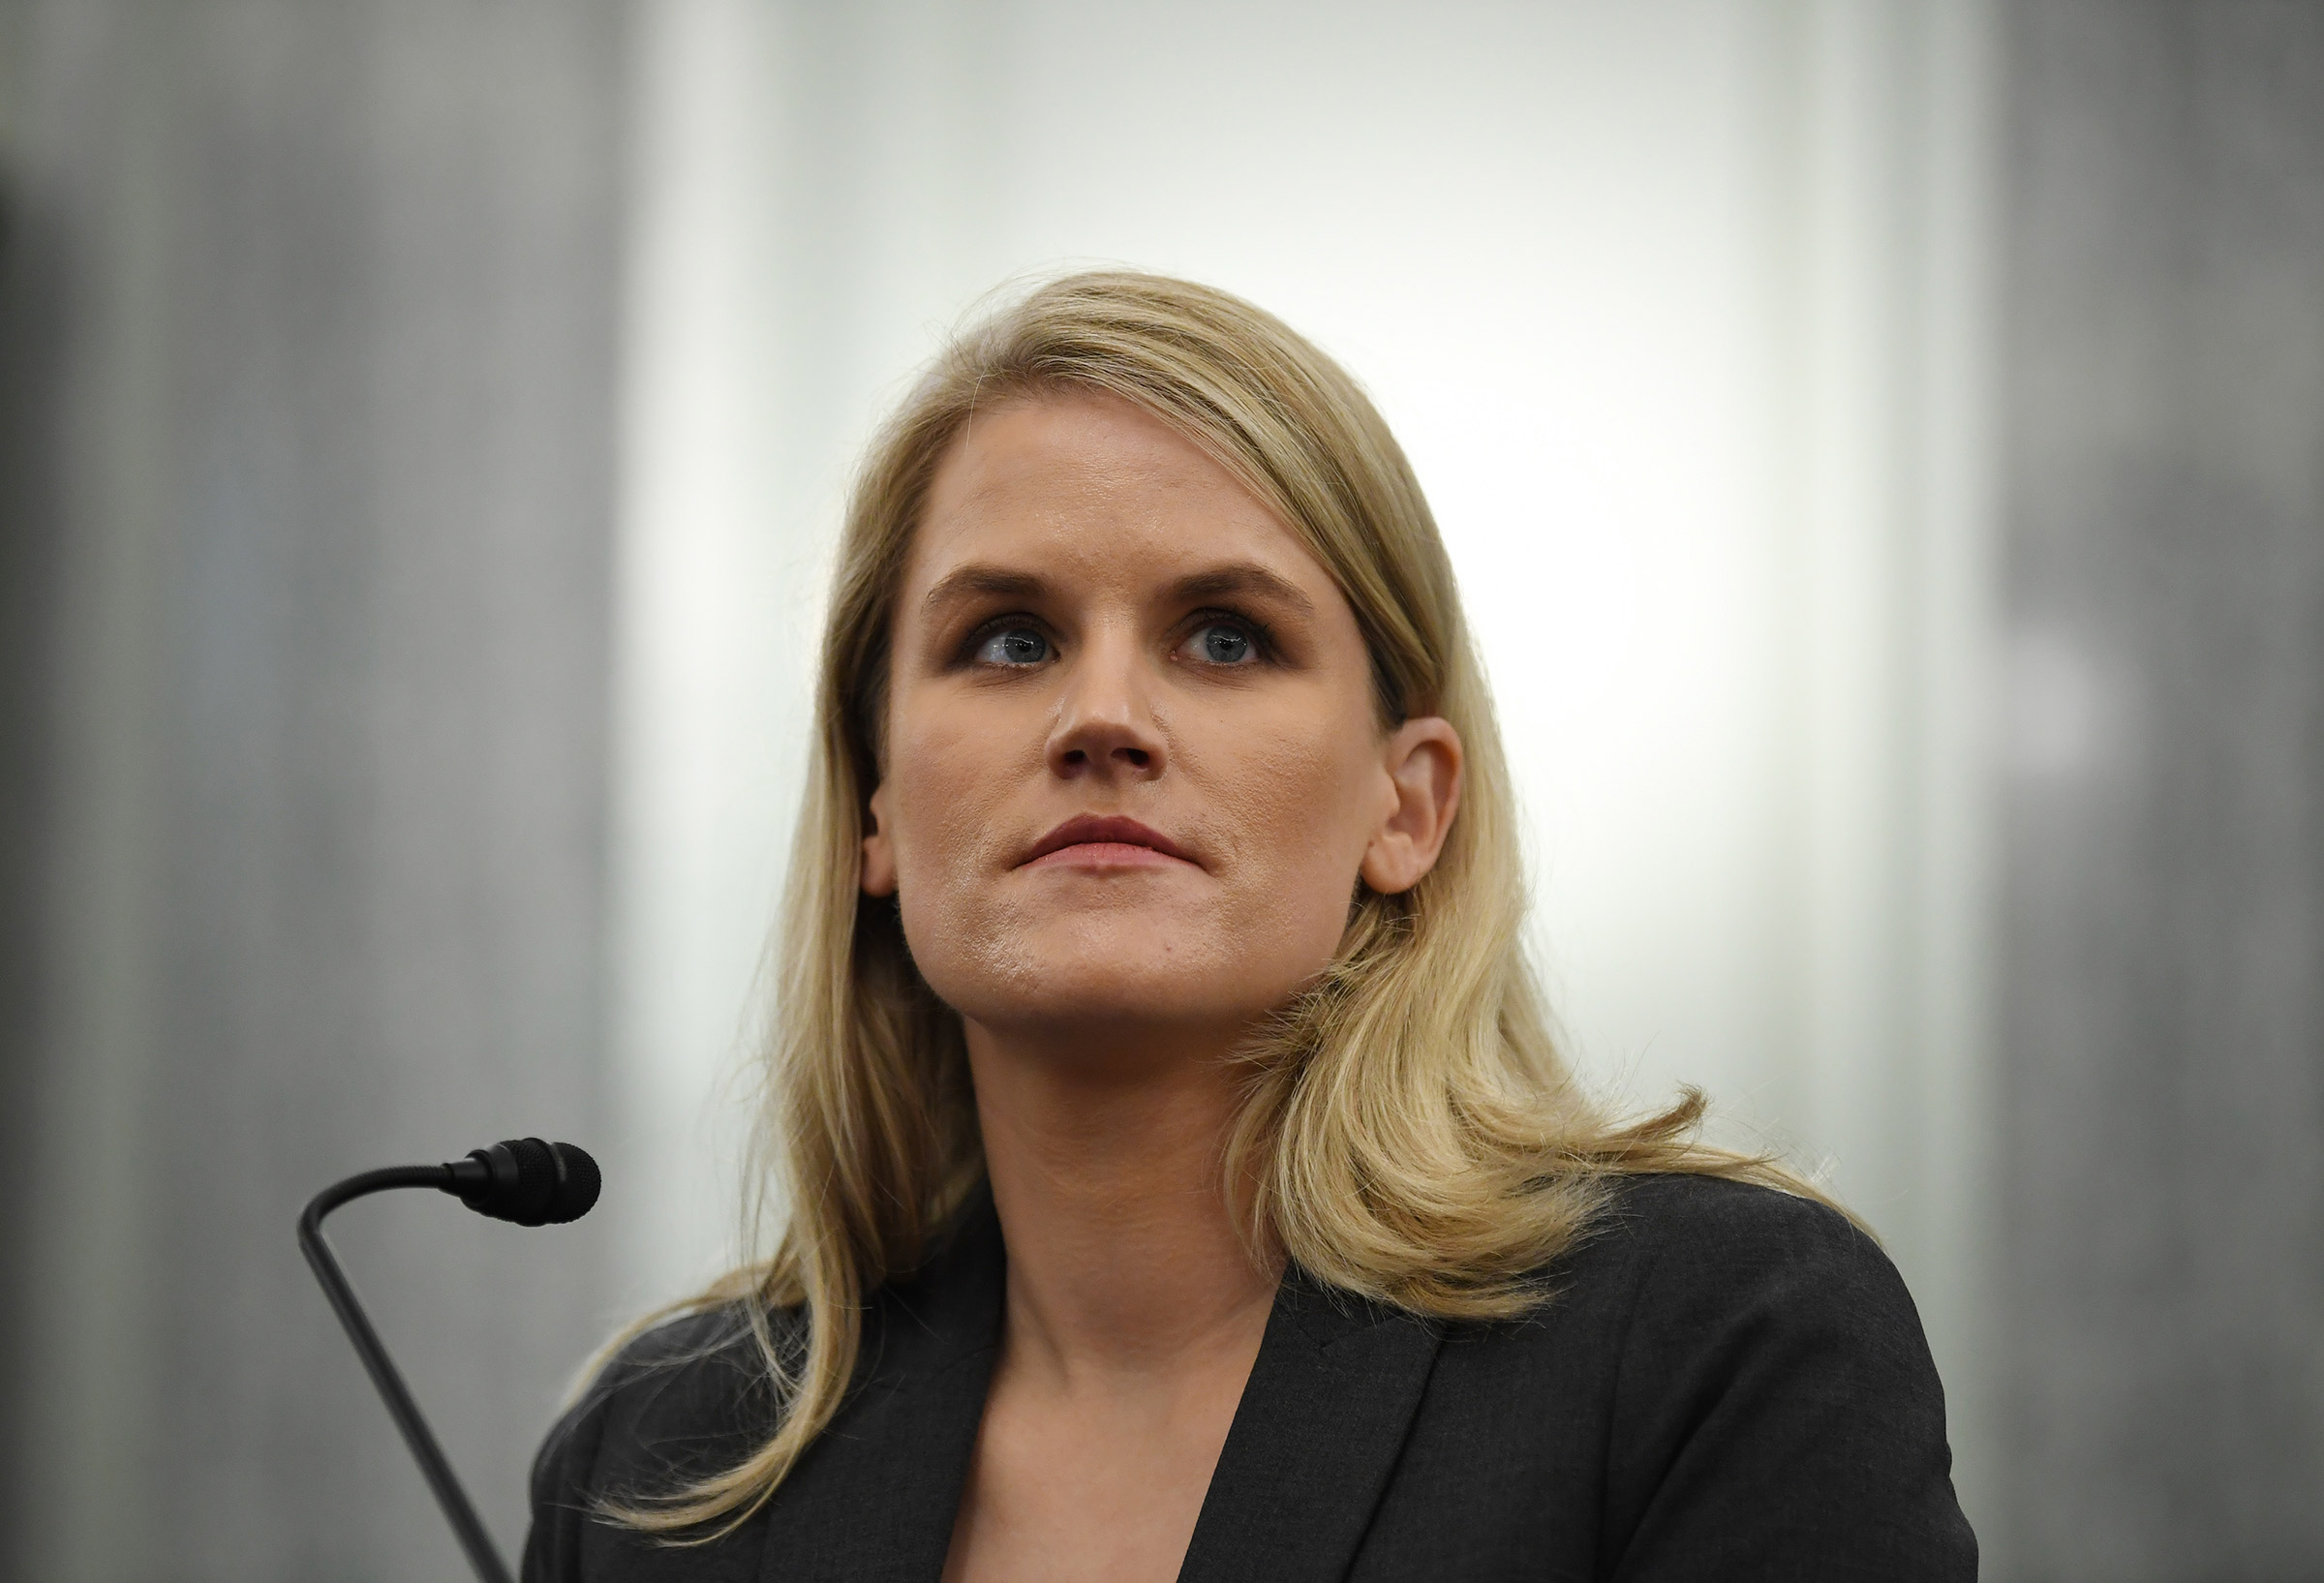 Facebook whistle-blower Frances Haugen appears before the Senate Commerce, Science, and Transportation Subcommittee in Washington, D.C., on Oct. 5, 2021. (Matt McClain—Getty Images)